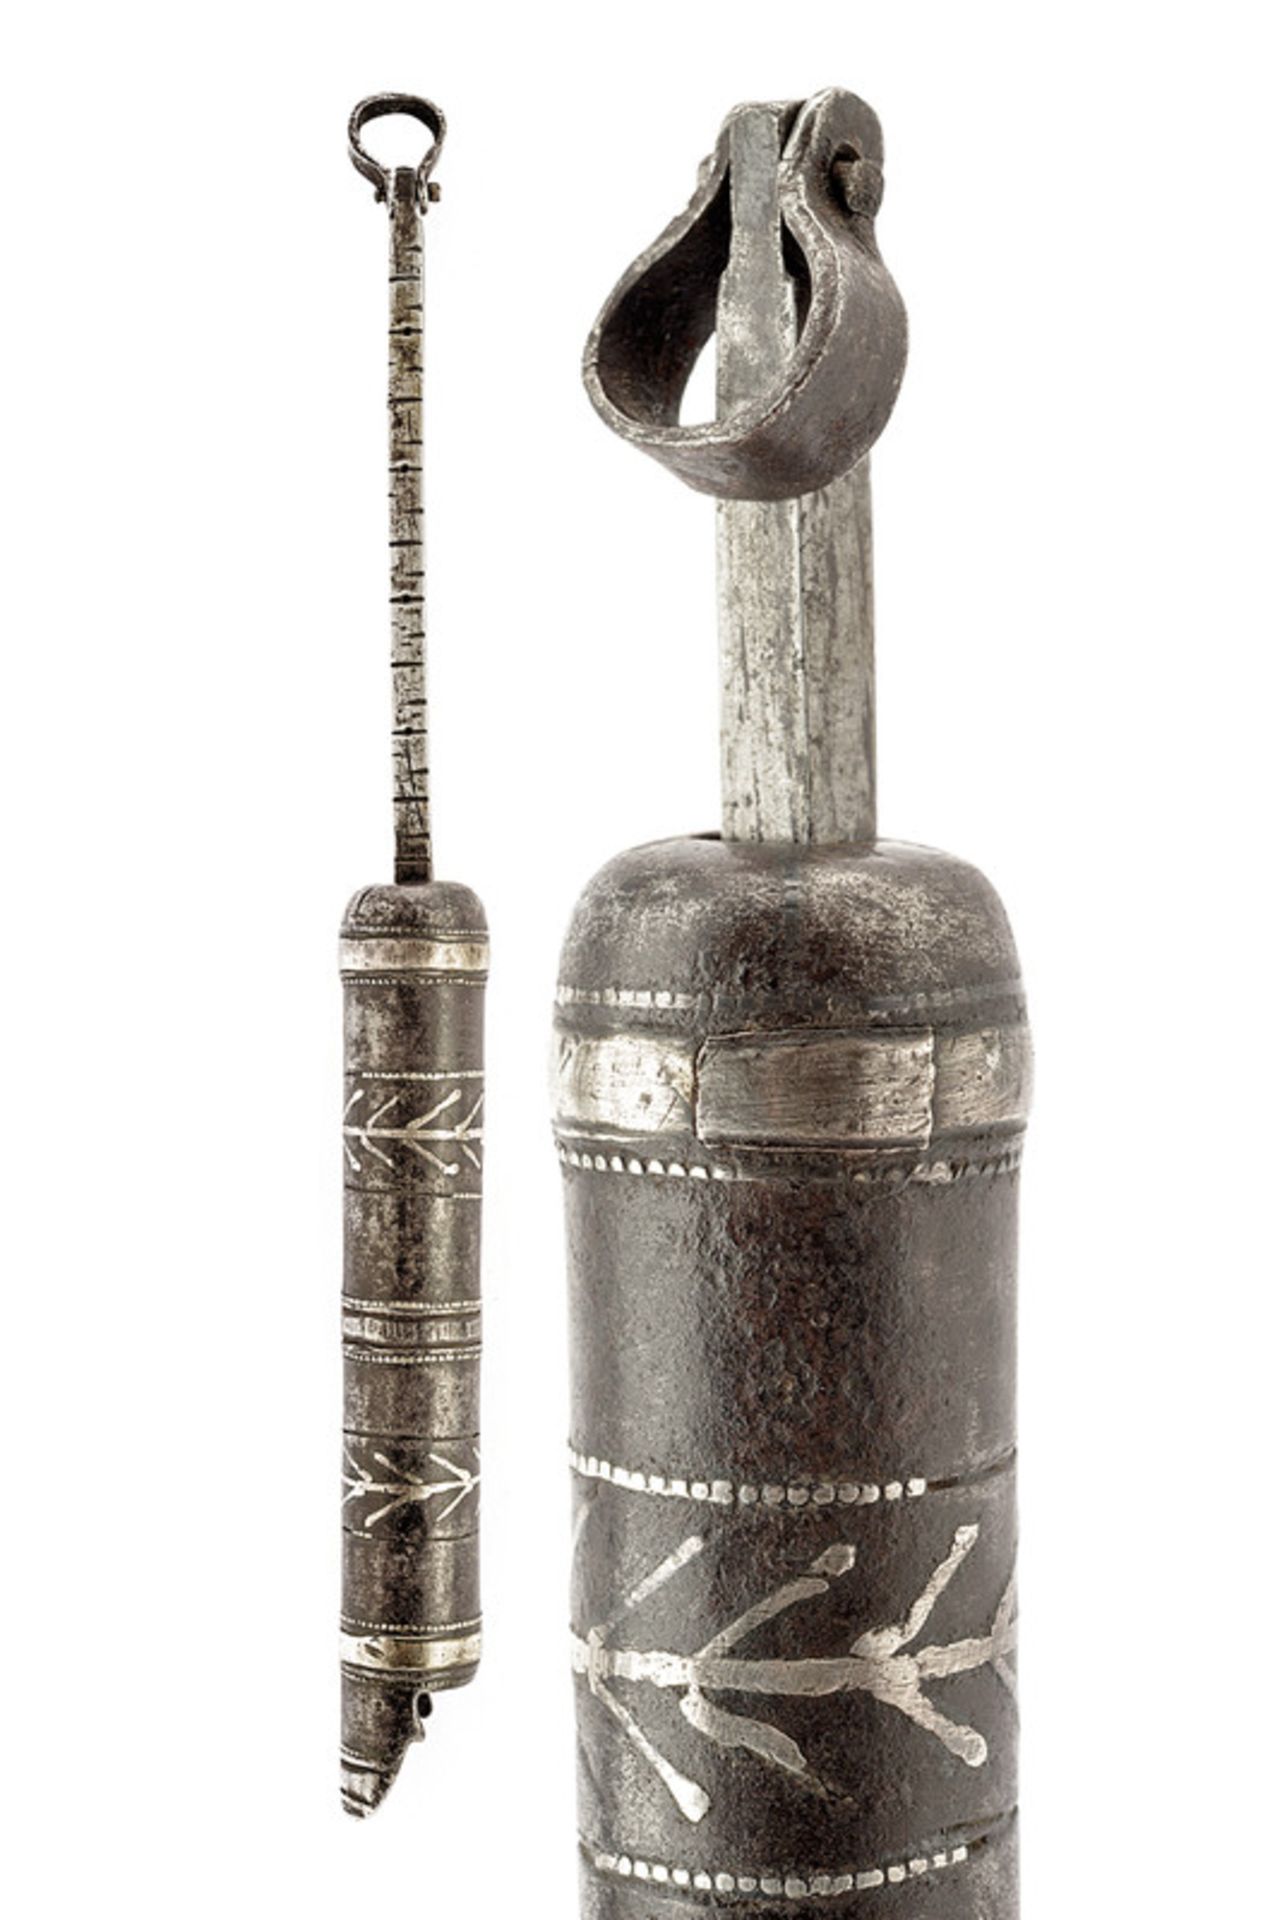 A powder dispenser dating: early 19th Century provenance: Turkey Cylindrical, iron body featuring